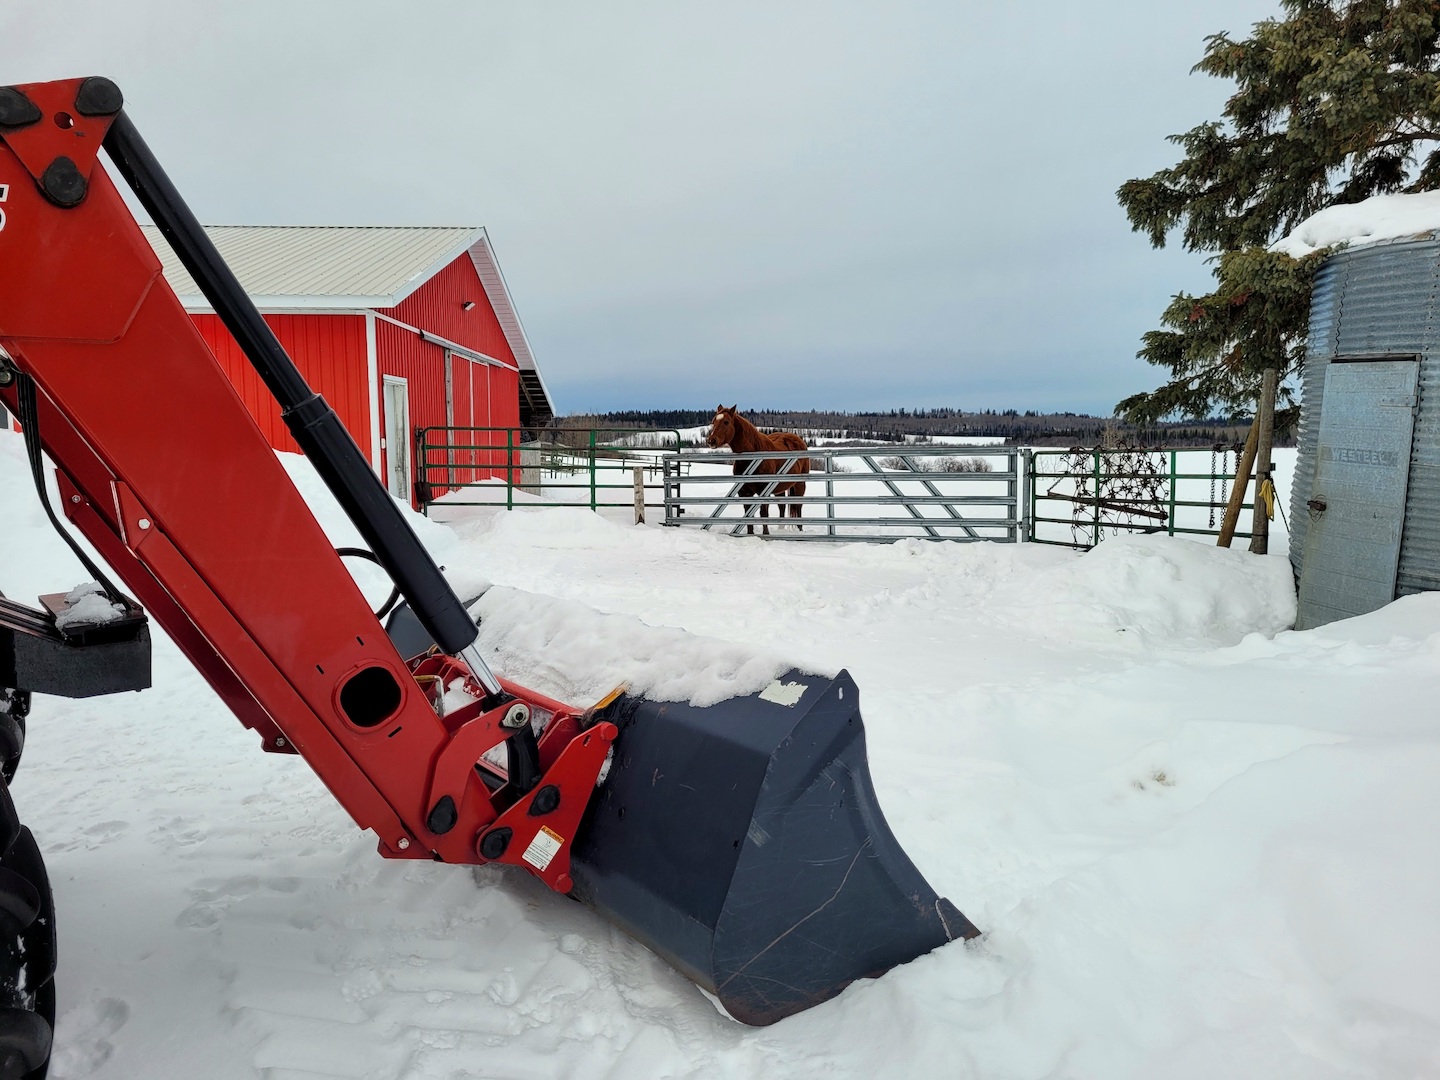 photo of a red tractor arm in front of a red barn, surrounded by snow